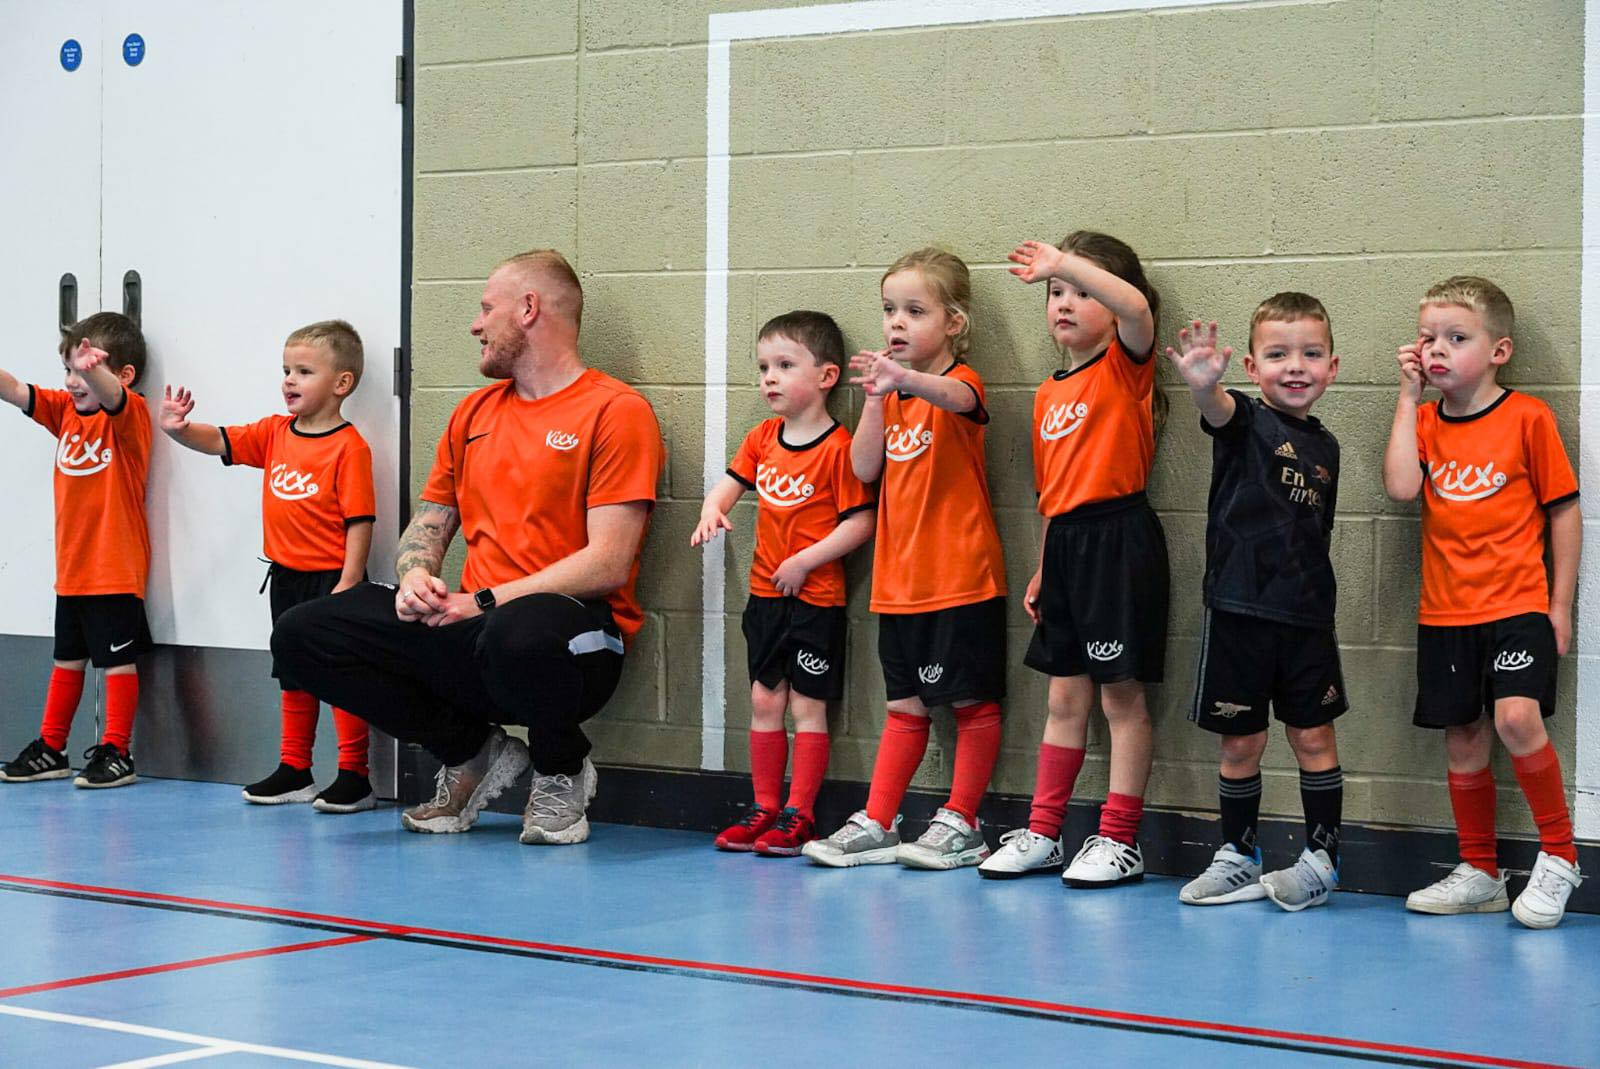 Kixx Football Academy has places available for children in Alfreton, Shirland and Tibshelf